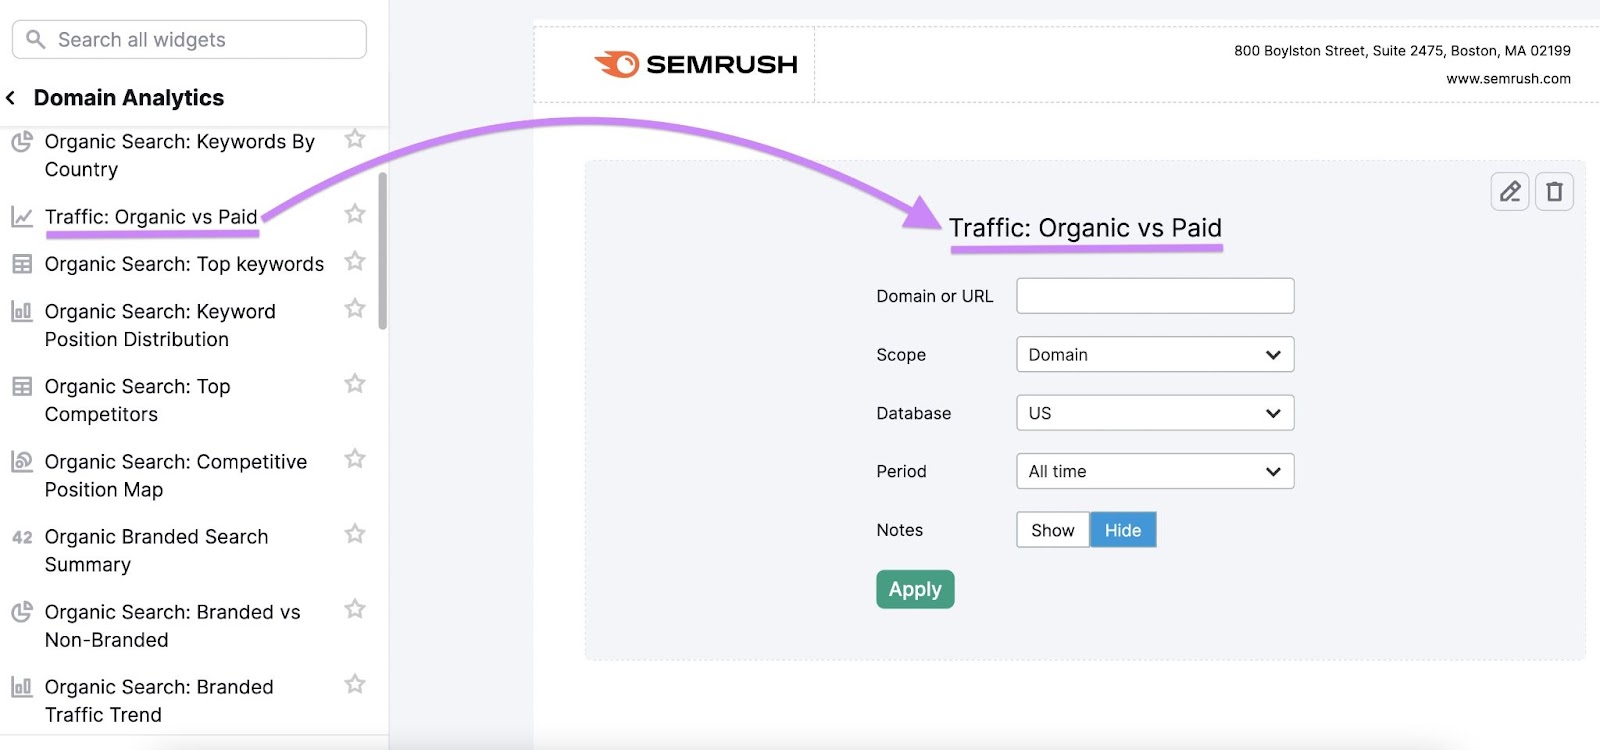 Creating a report titled "Traffic: Organic vs Paid" in the My Reports tool